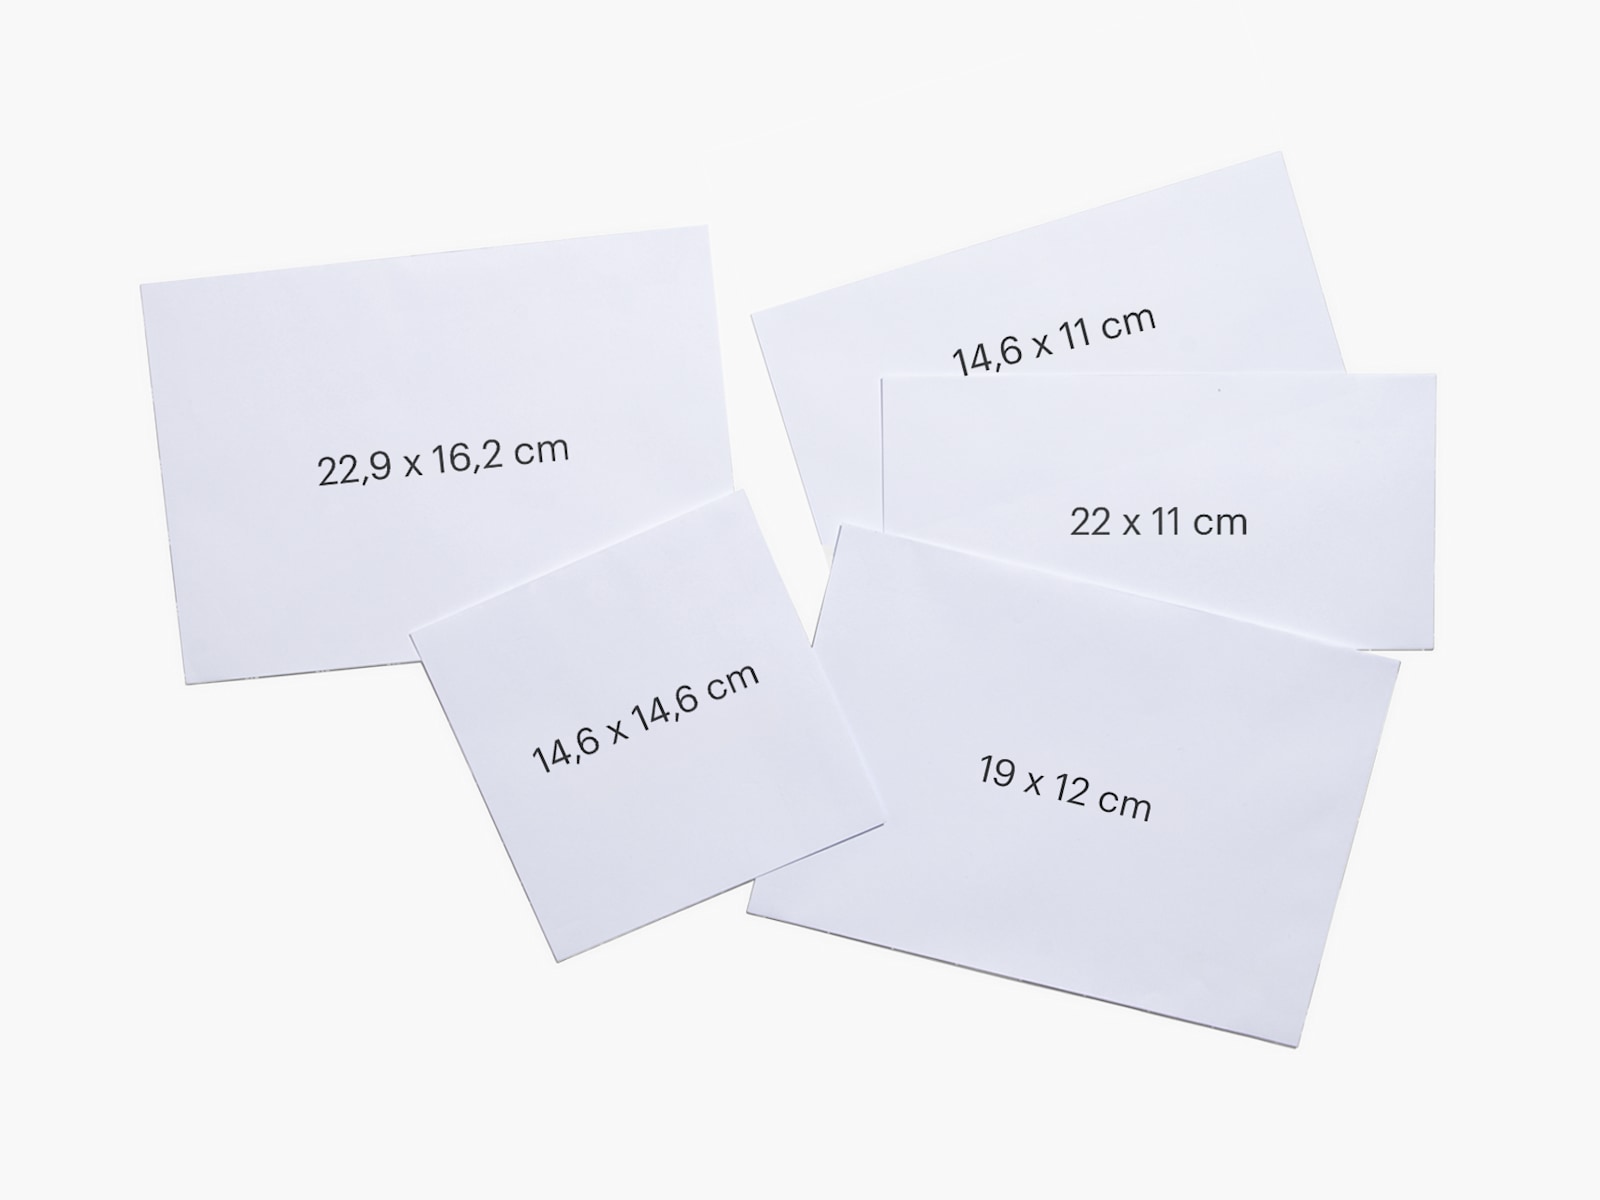 Five different-sized custom envelopes showing their height and width